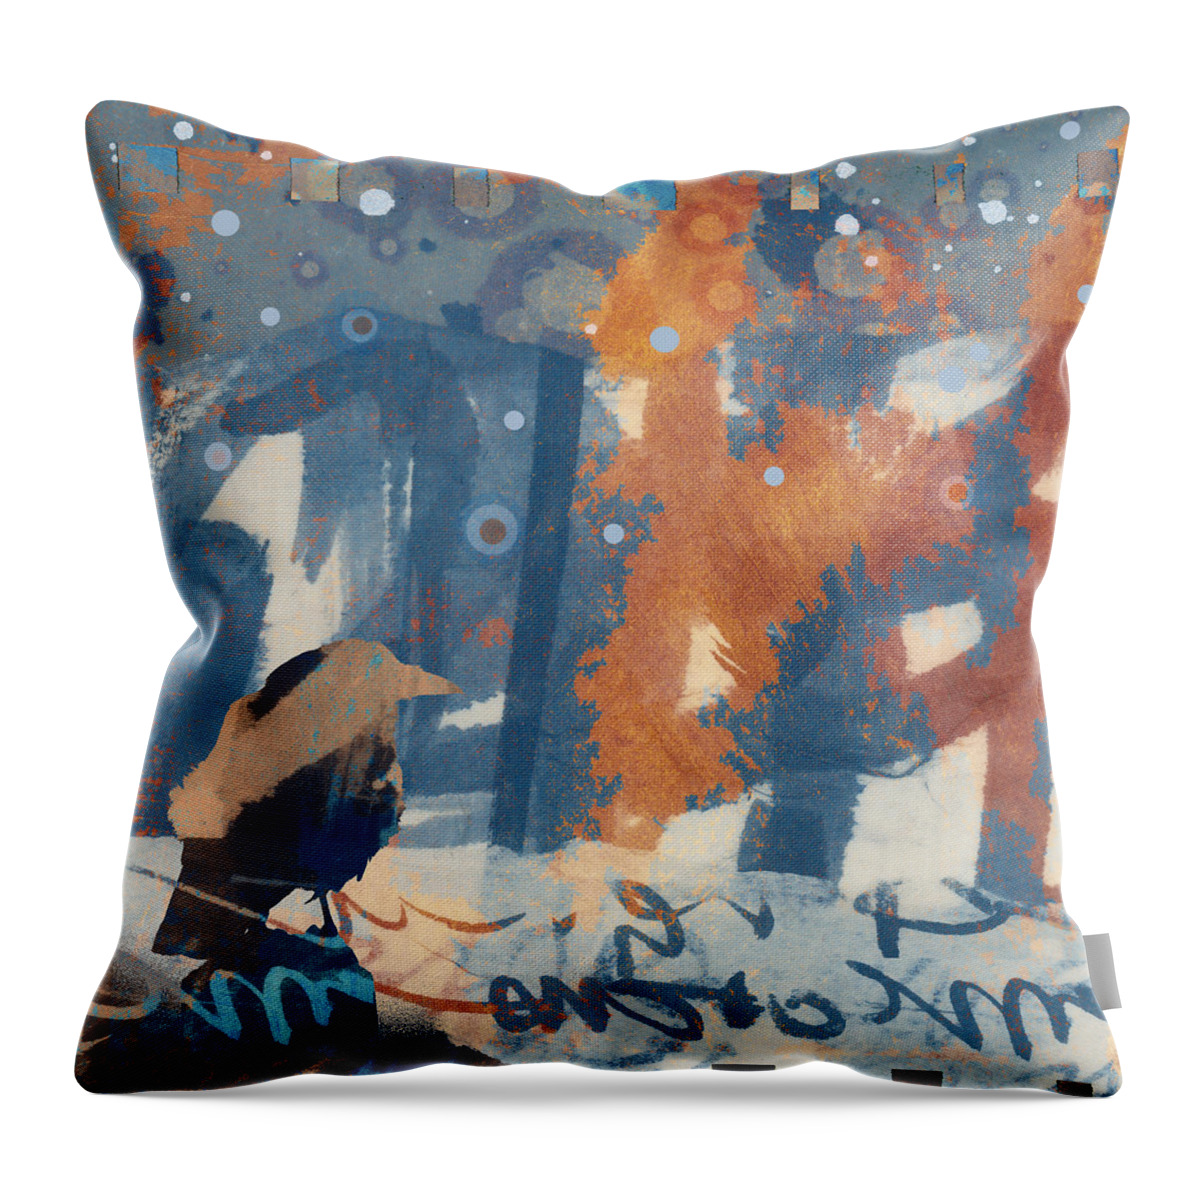 Crow Throw Pillow featuring the photograph Crow Snow by Carol Leigh